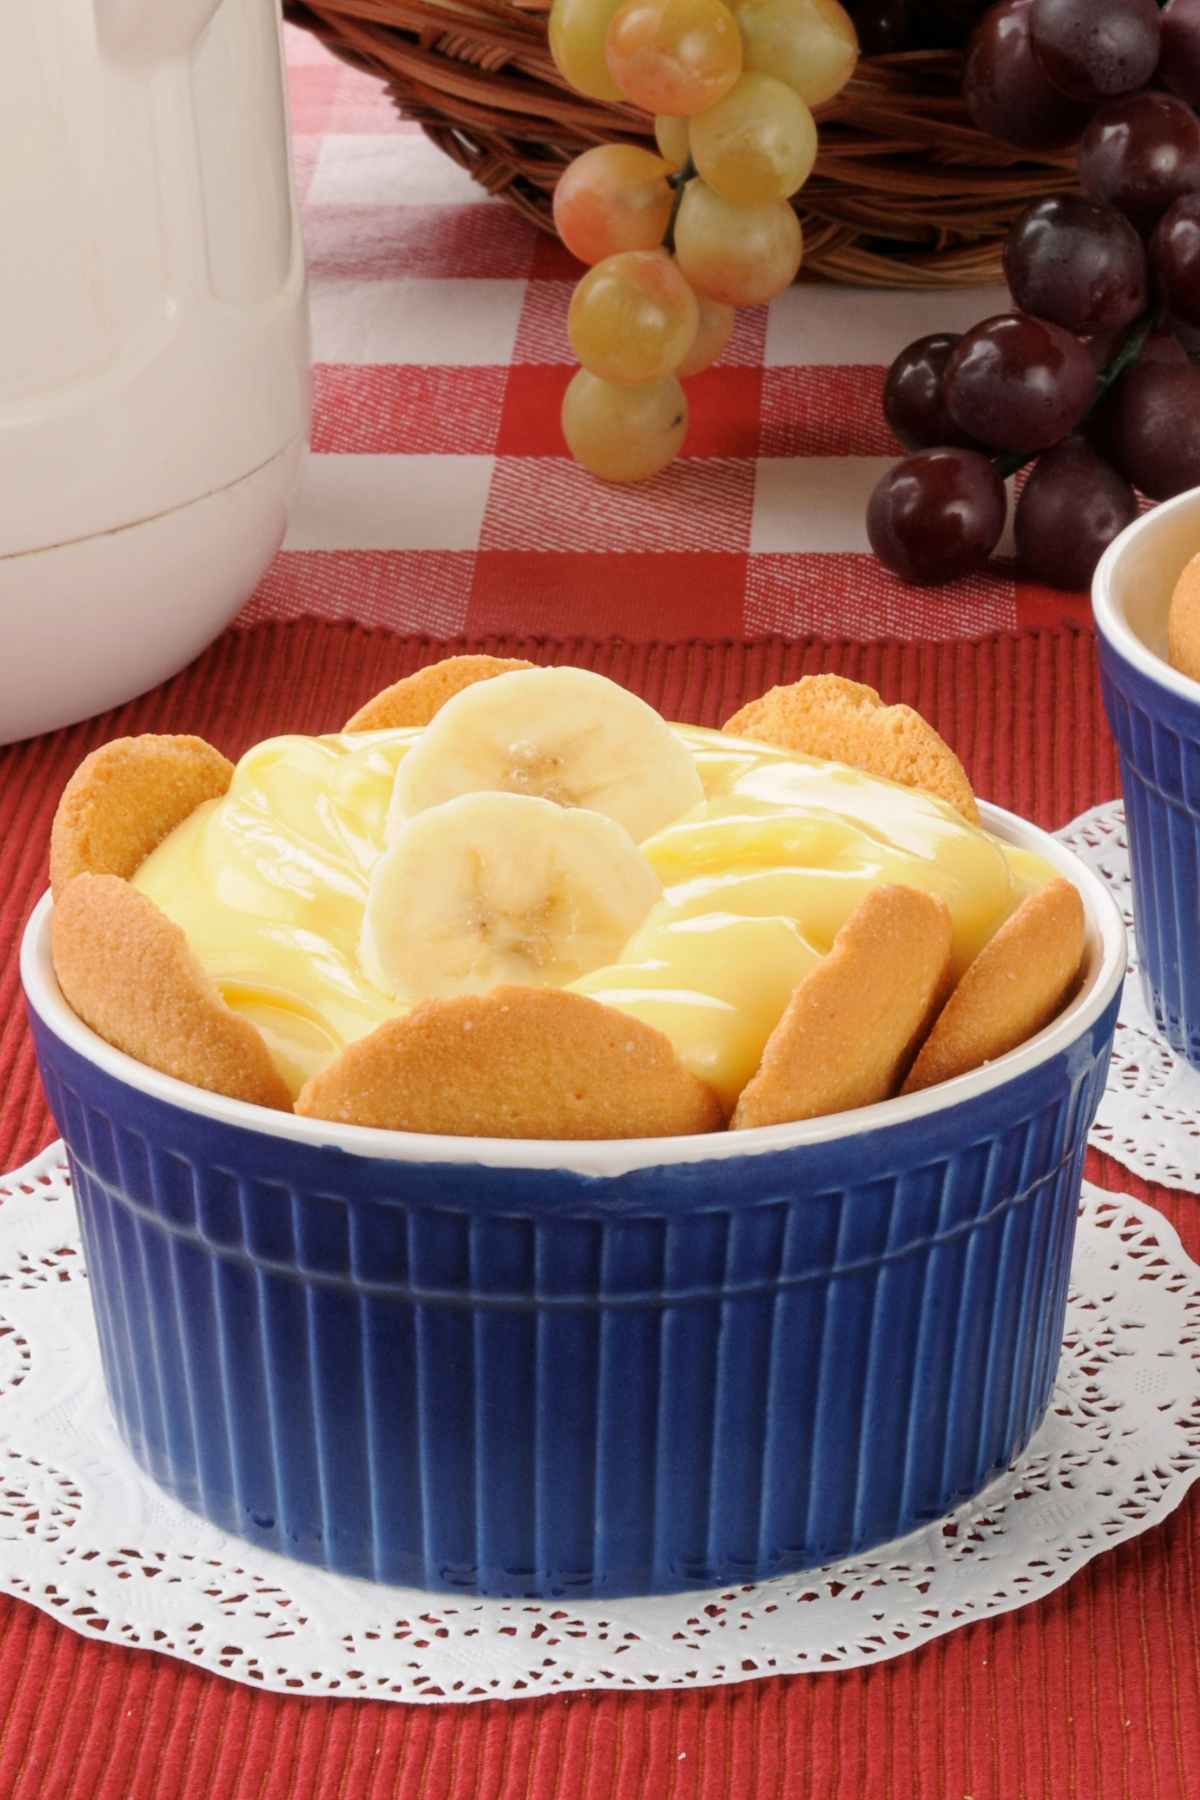 This sweet and creamy banana pudding takes just 25 minutes to make. It features ripe bananas, instant vanilla pudding, and sweetened condensed milk!